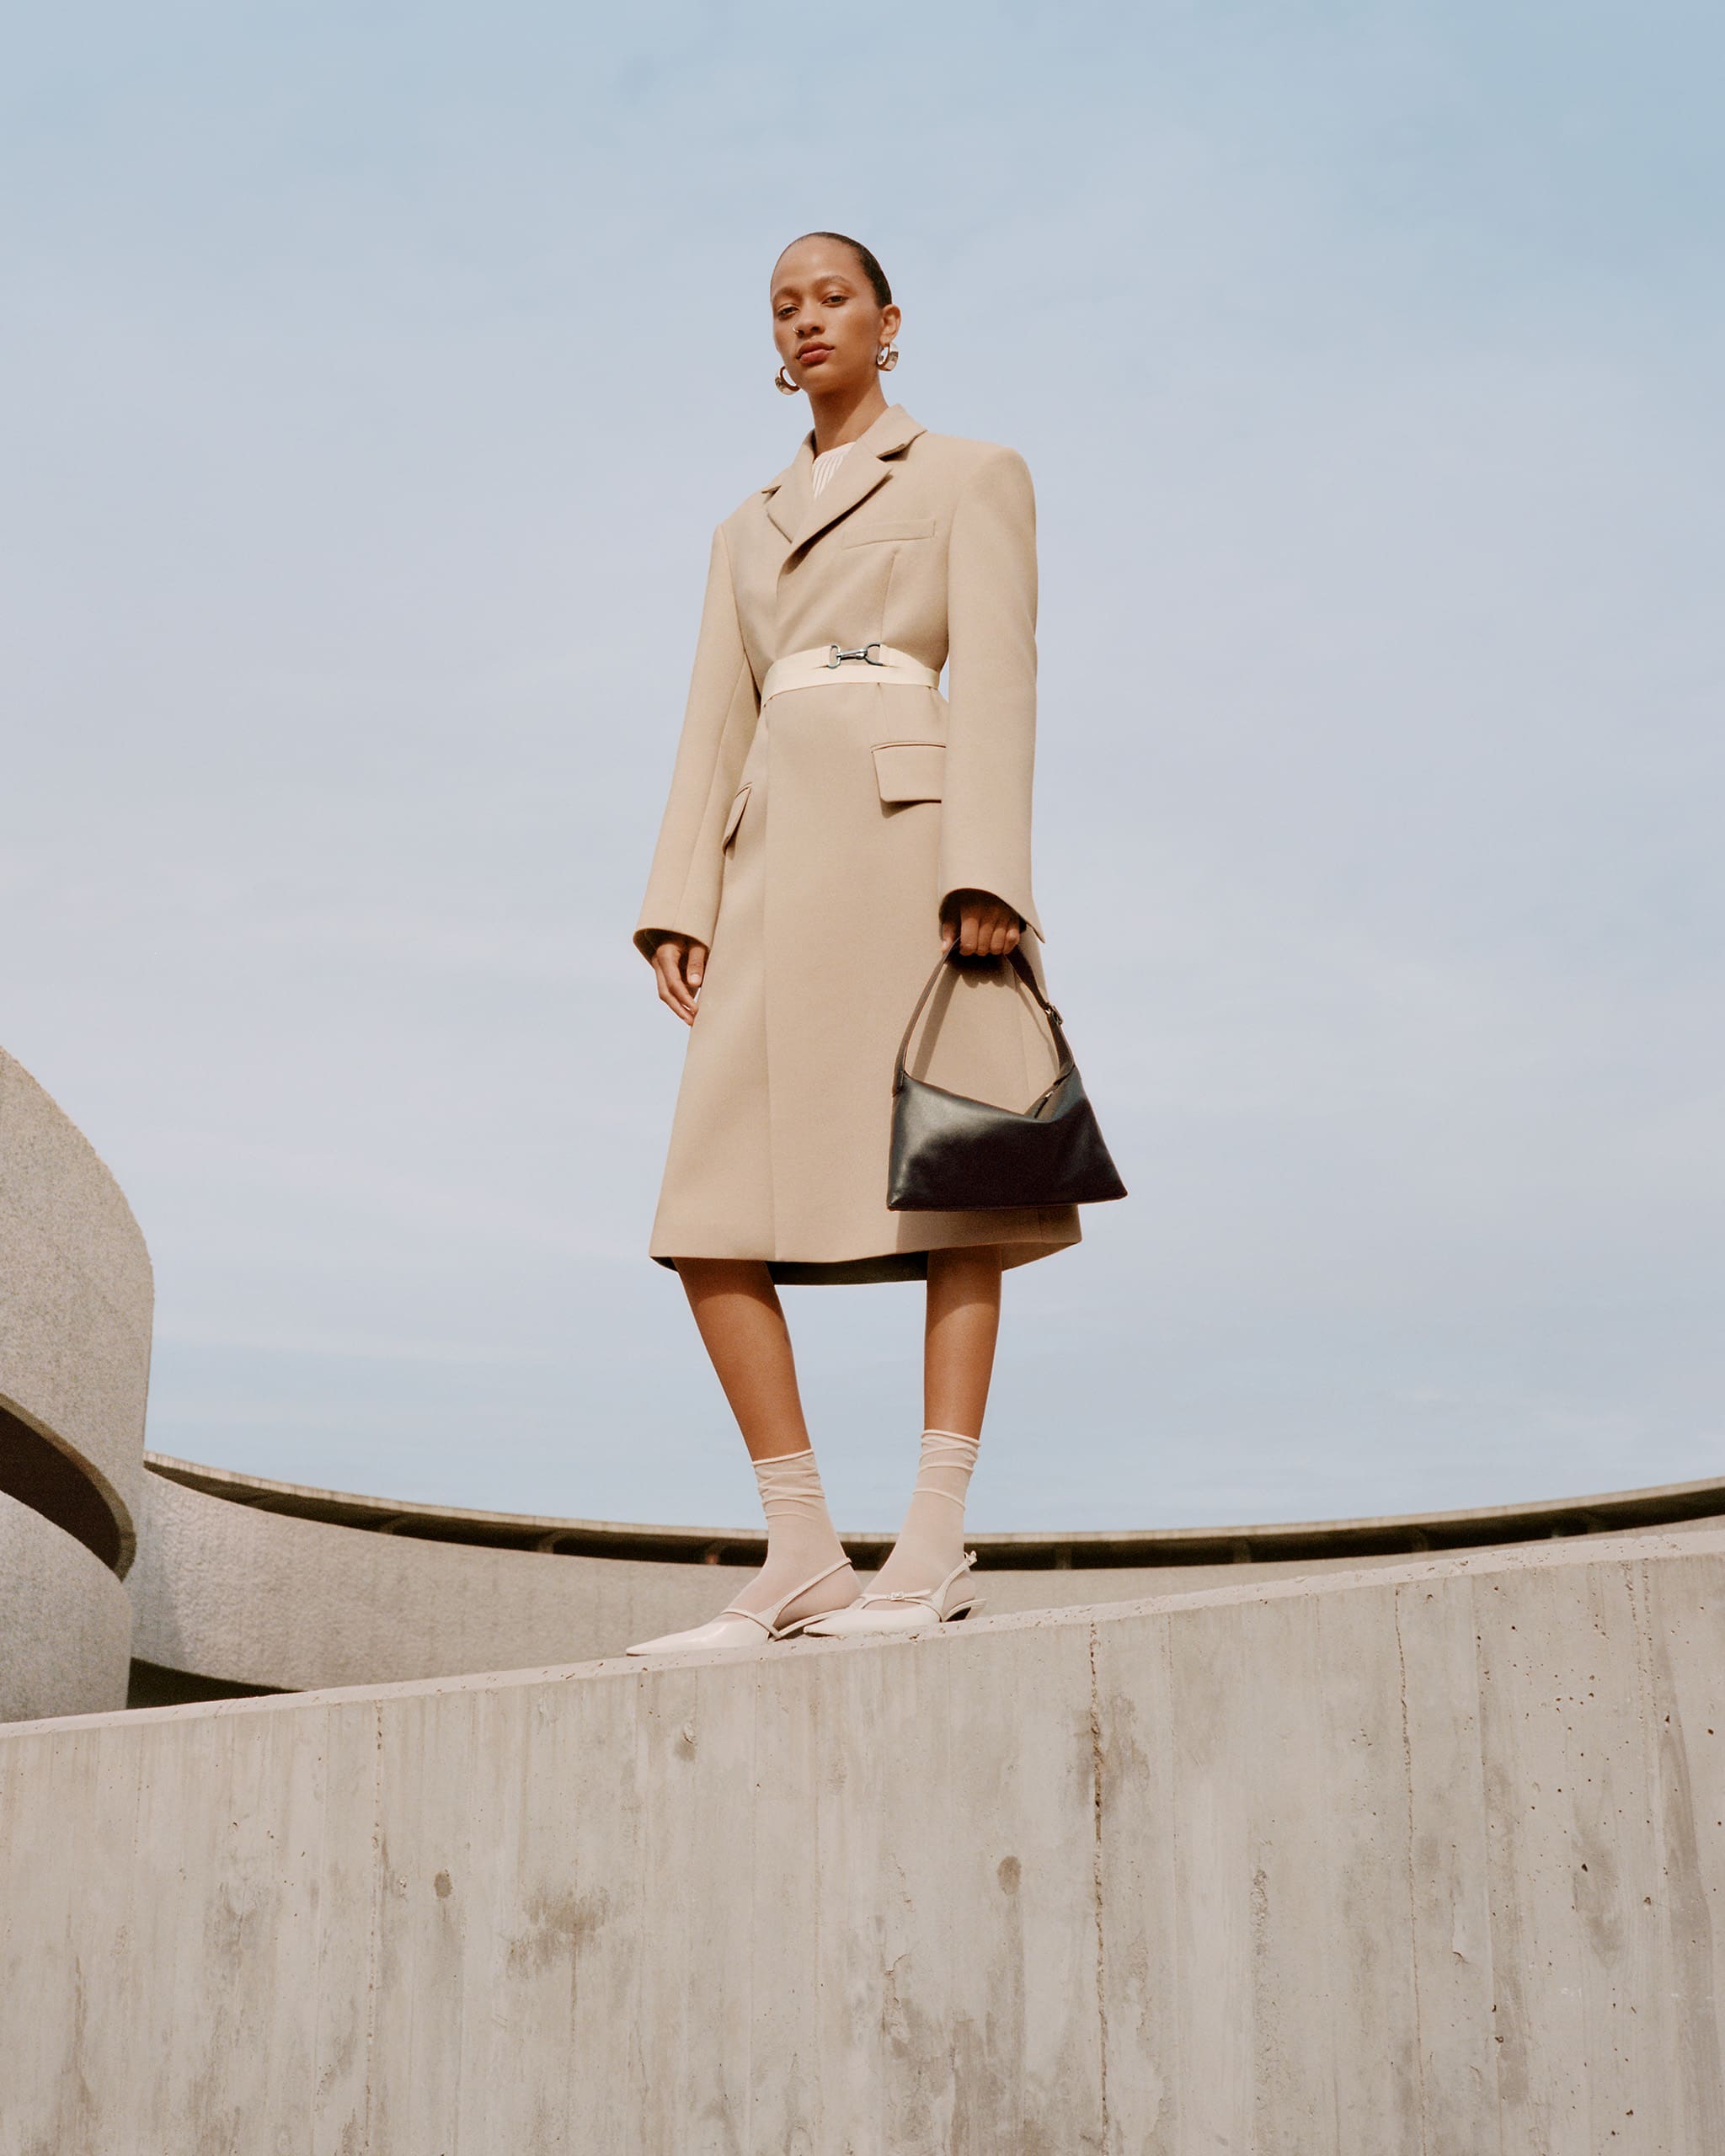 Selena Forrest wearing a beige trench coat from Mango's Selection collection